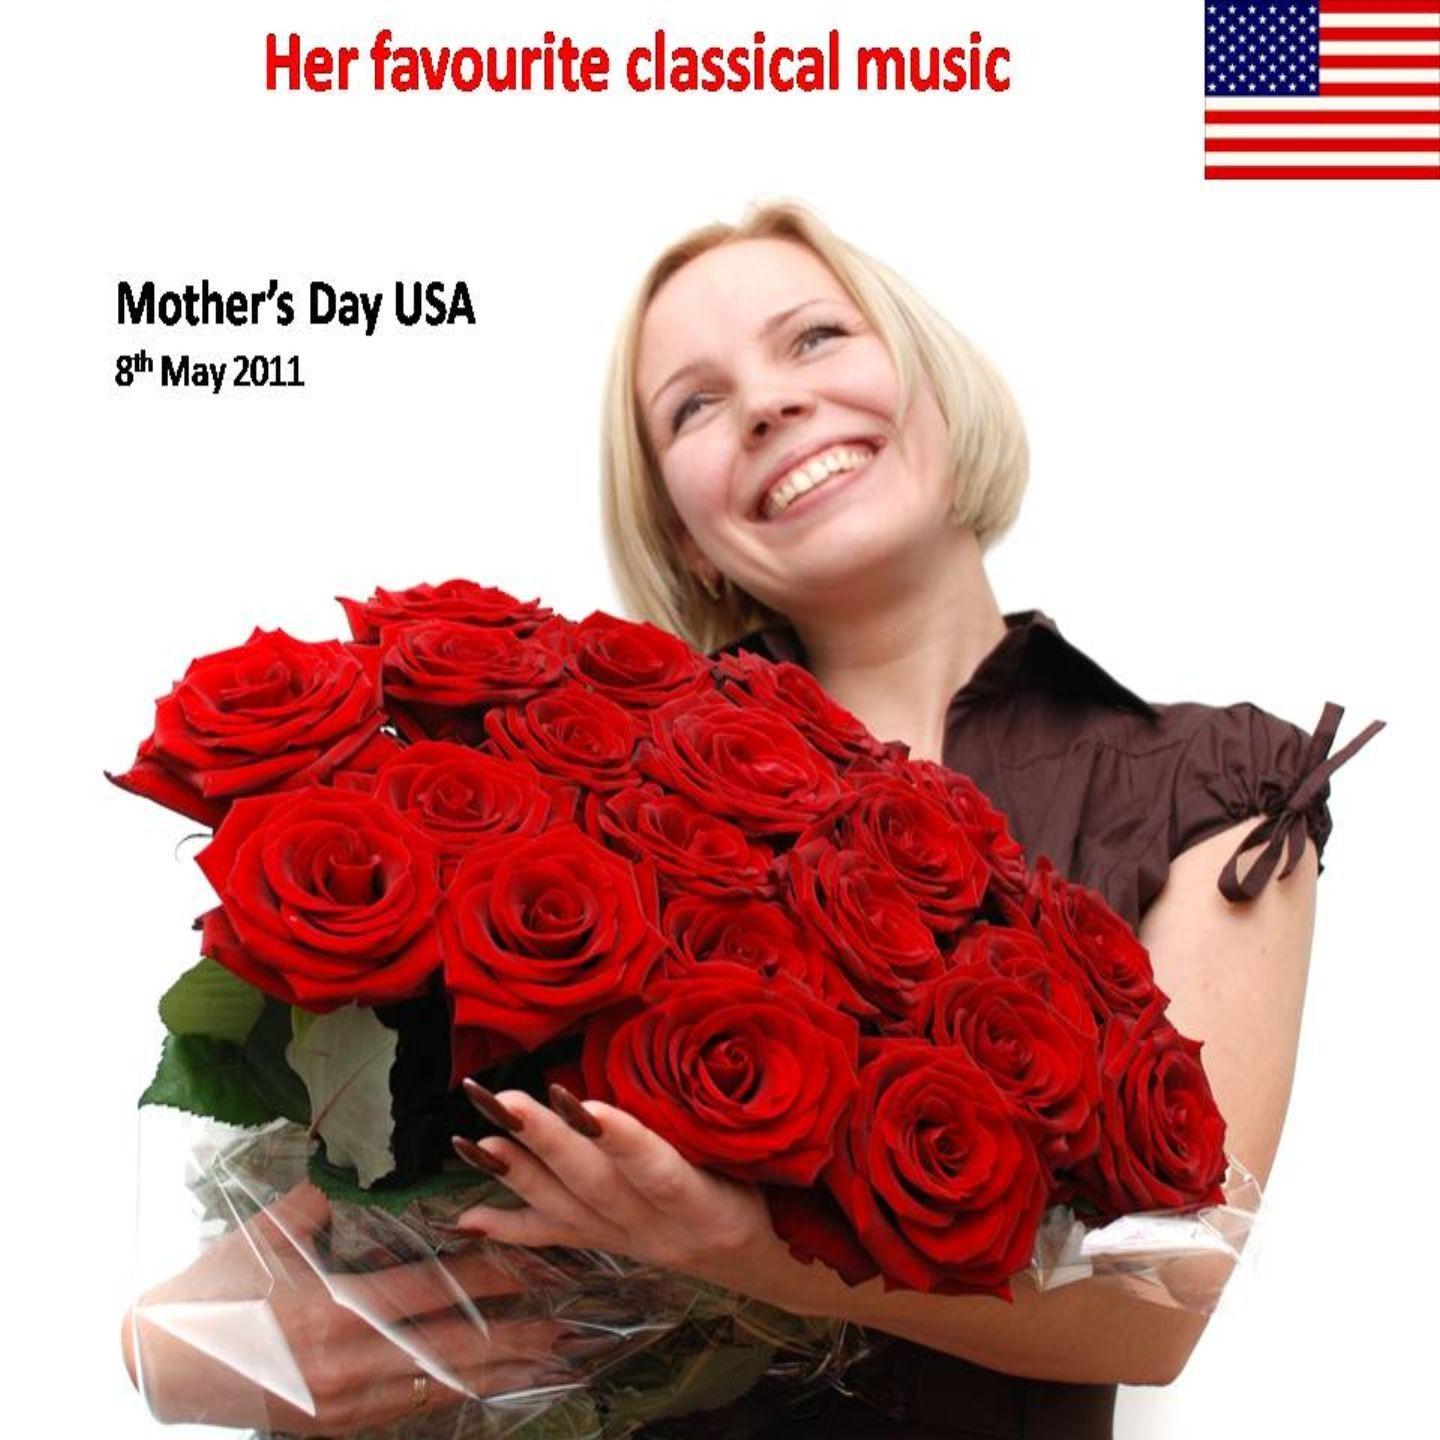 Classical Favourites for Mother's Day